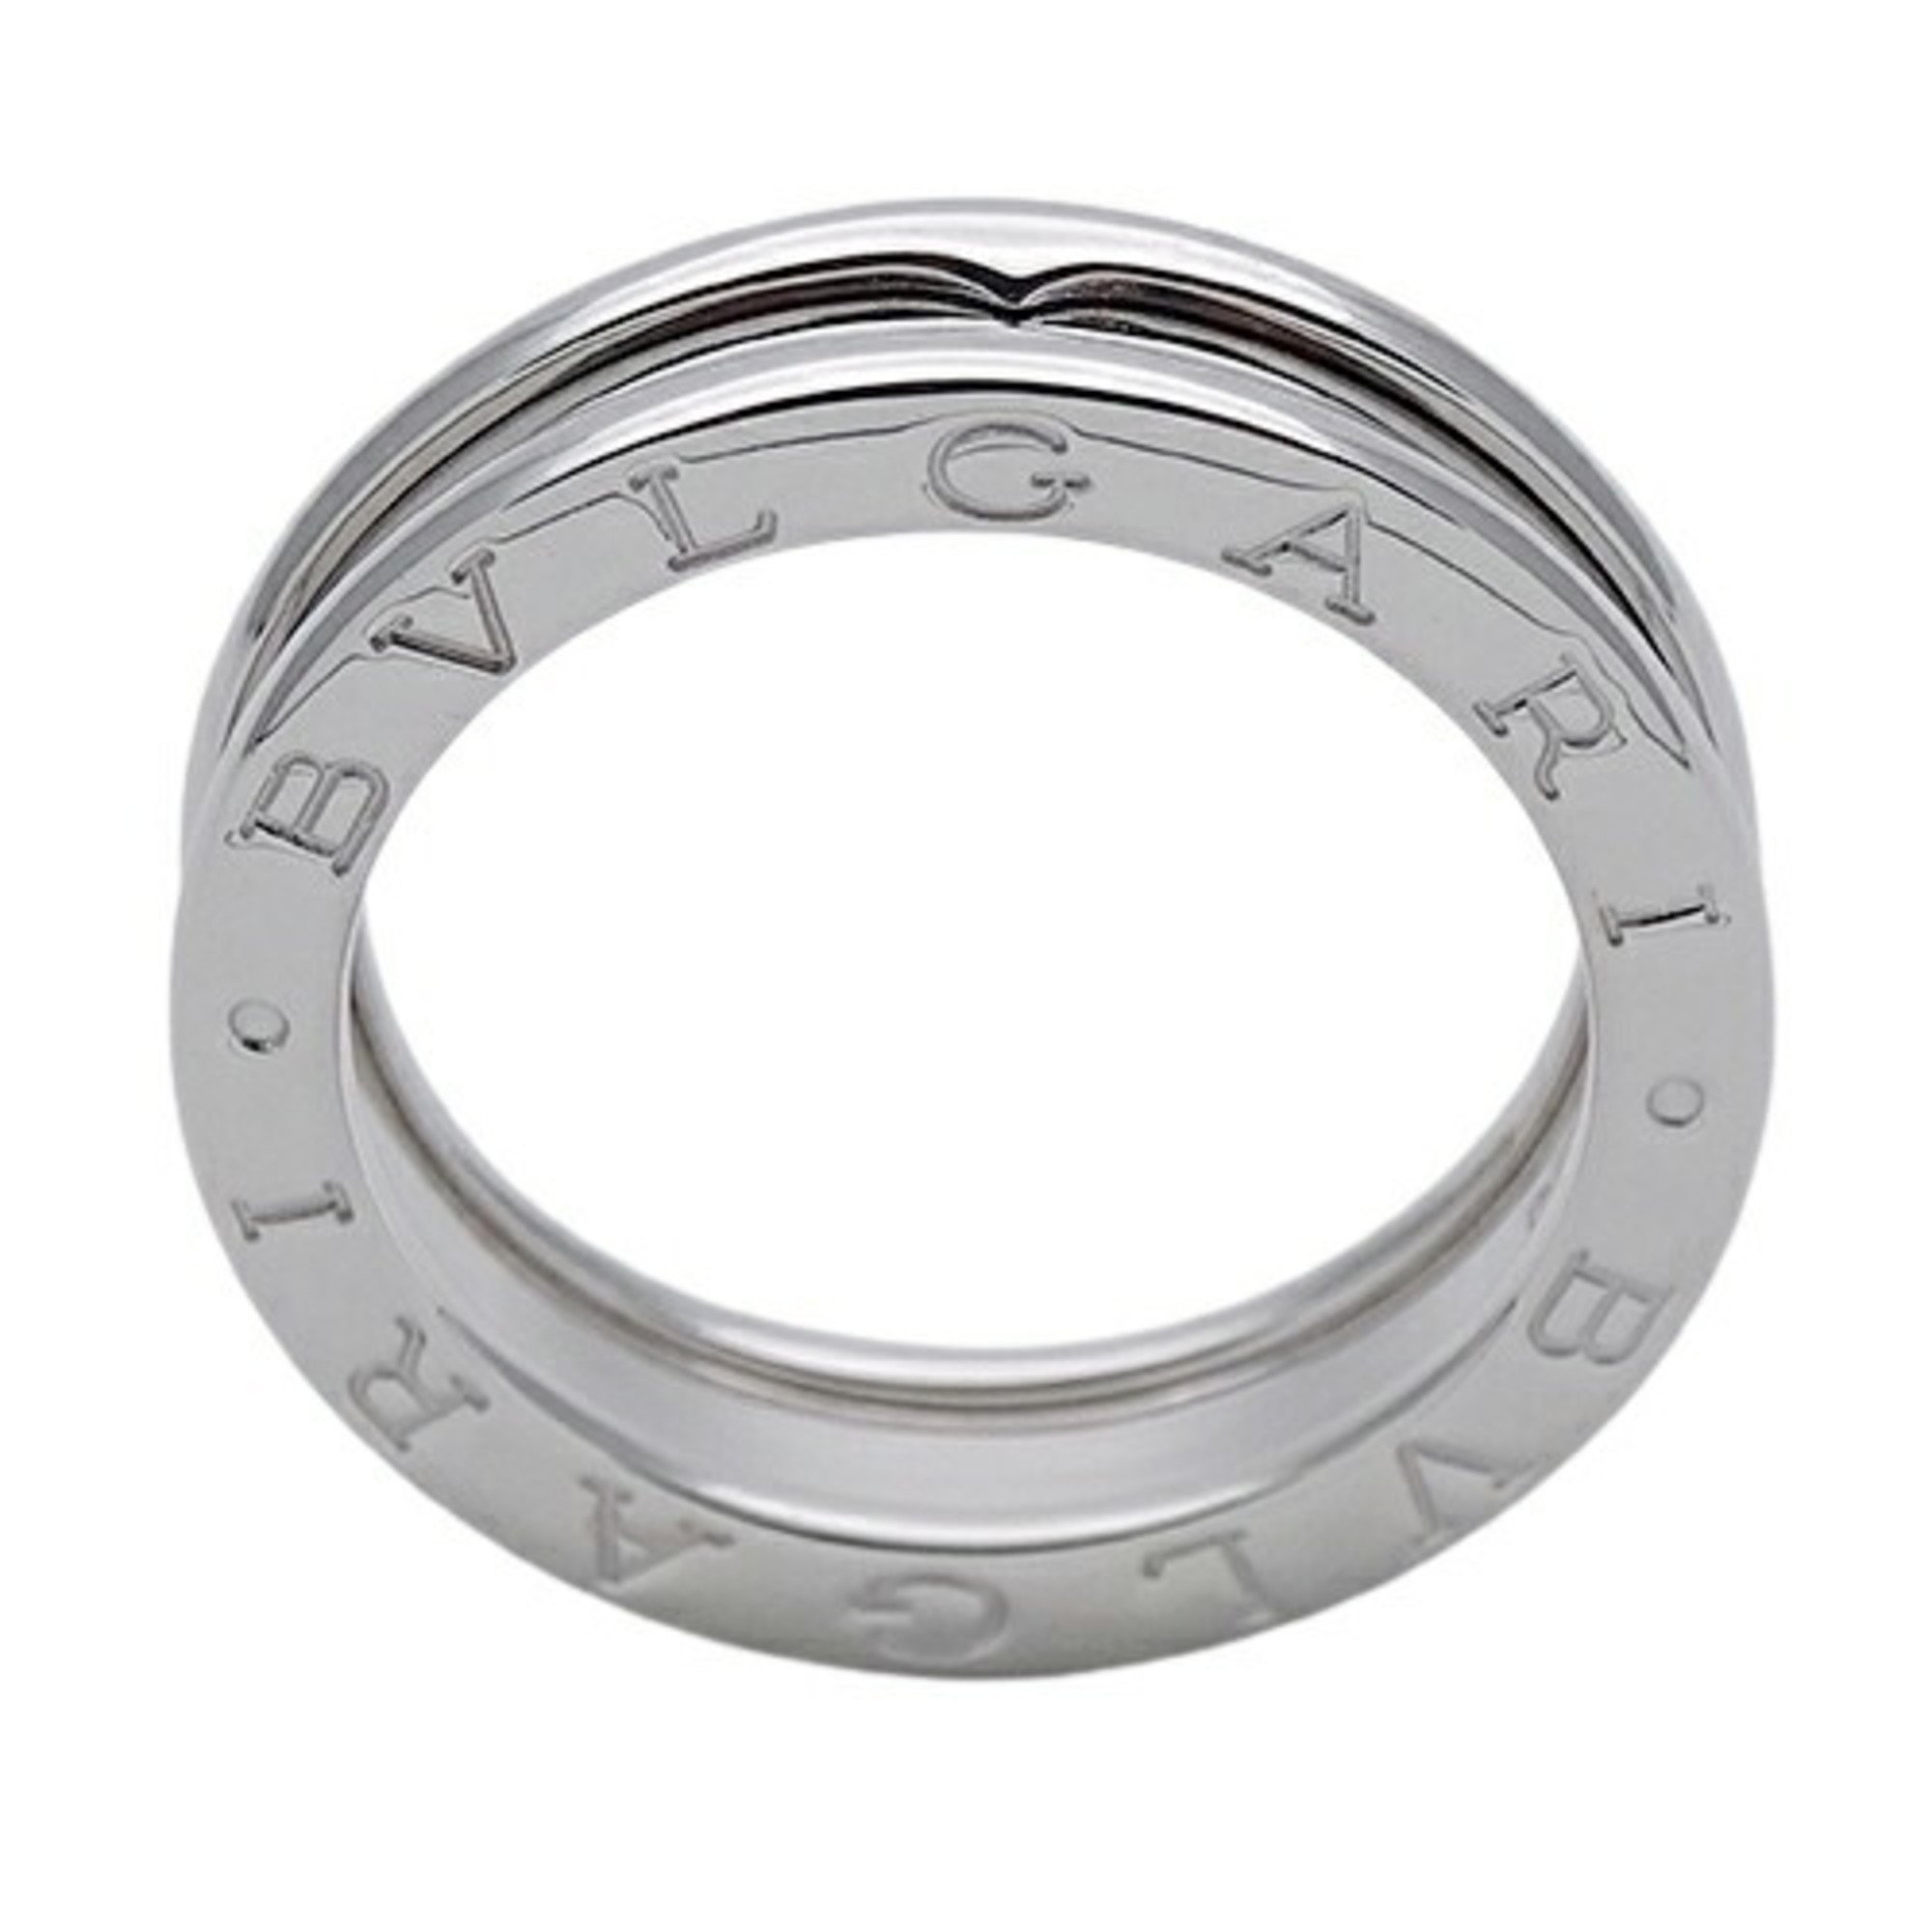 BVLGARI Ring for Women and Men, 750WG B-zero1, White Gold, 1 Band, #52, Approx. Size 12, Polished